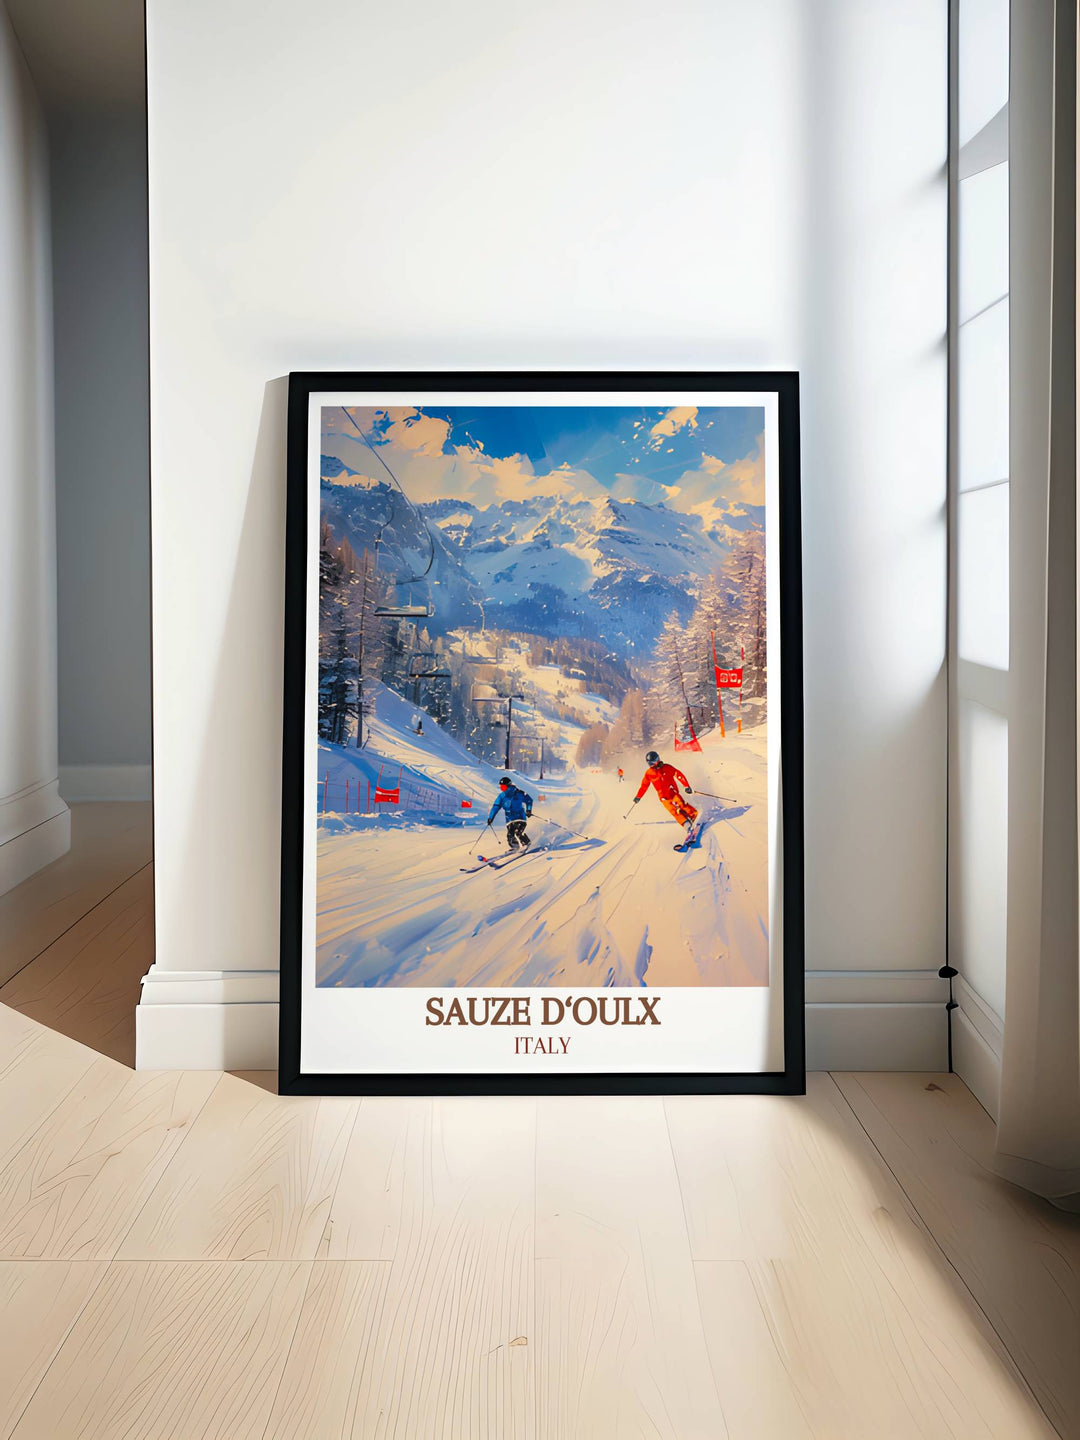 Sauze dOulx Ski Resort Gallery Wall Art capturing the thrilling slopes and stunning landscapes of the Italian Alps, perfect for adding adventure to your home decor.